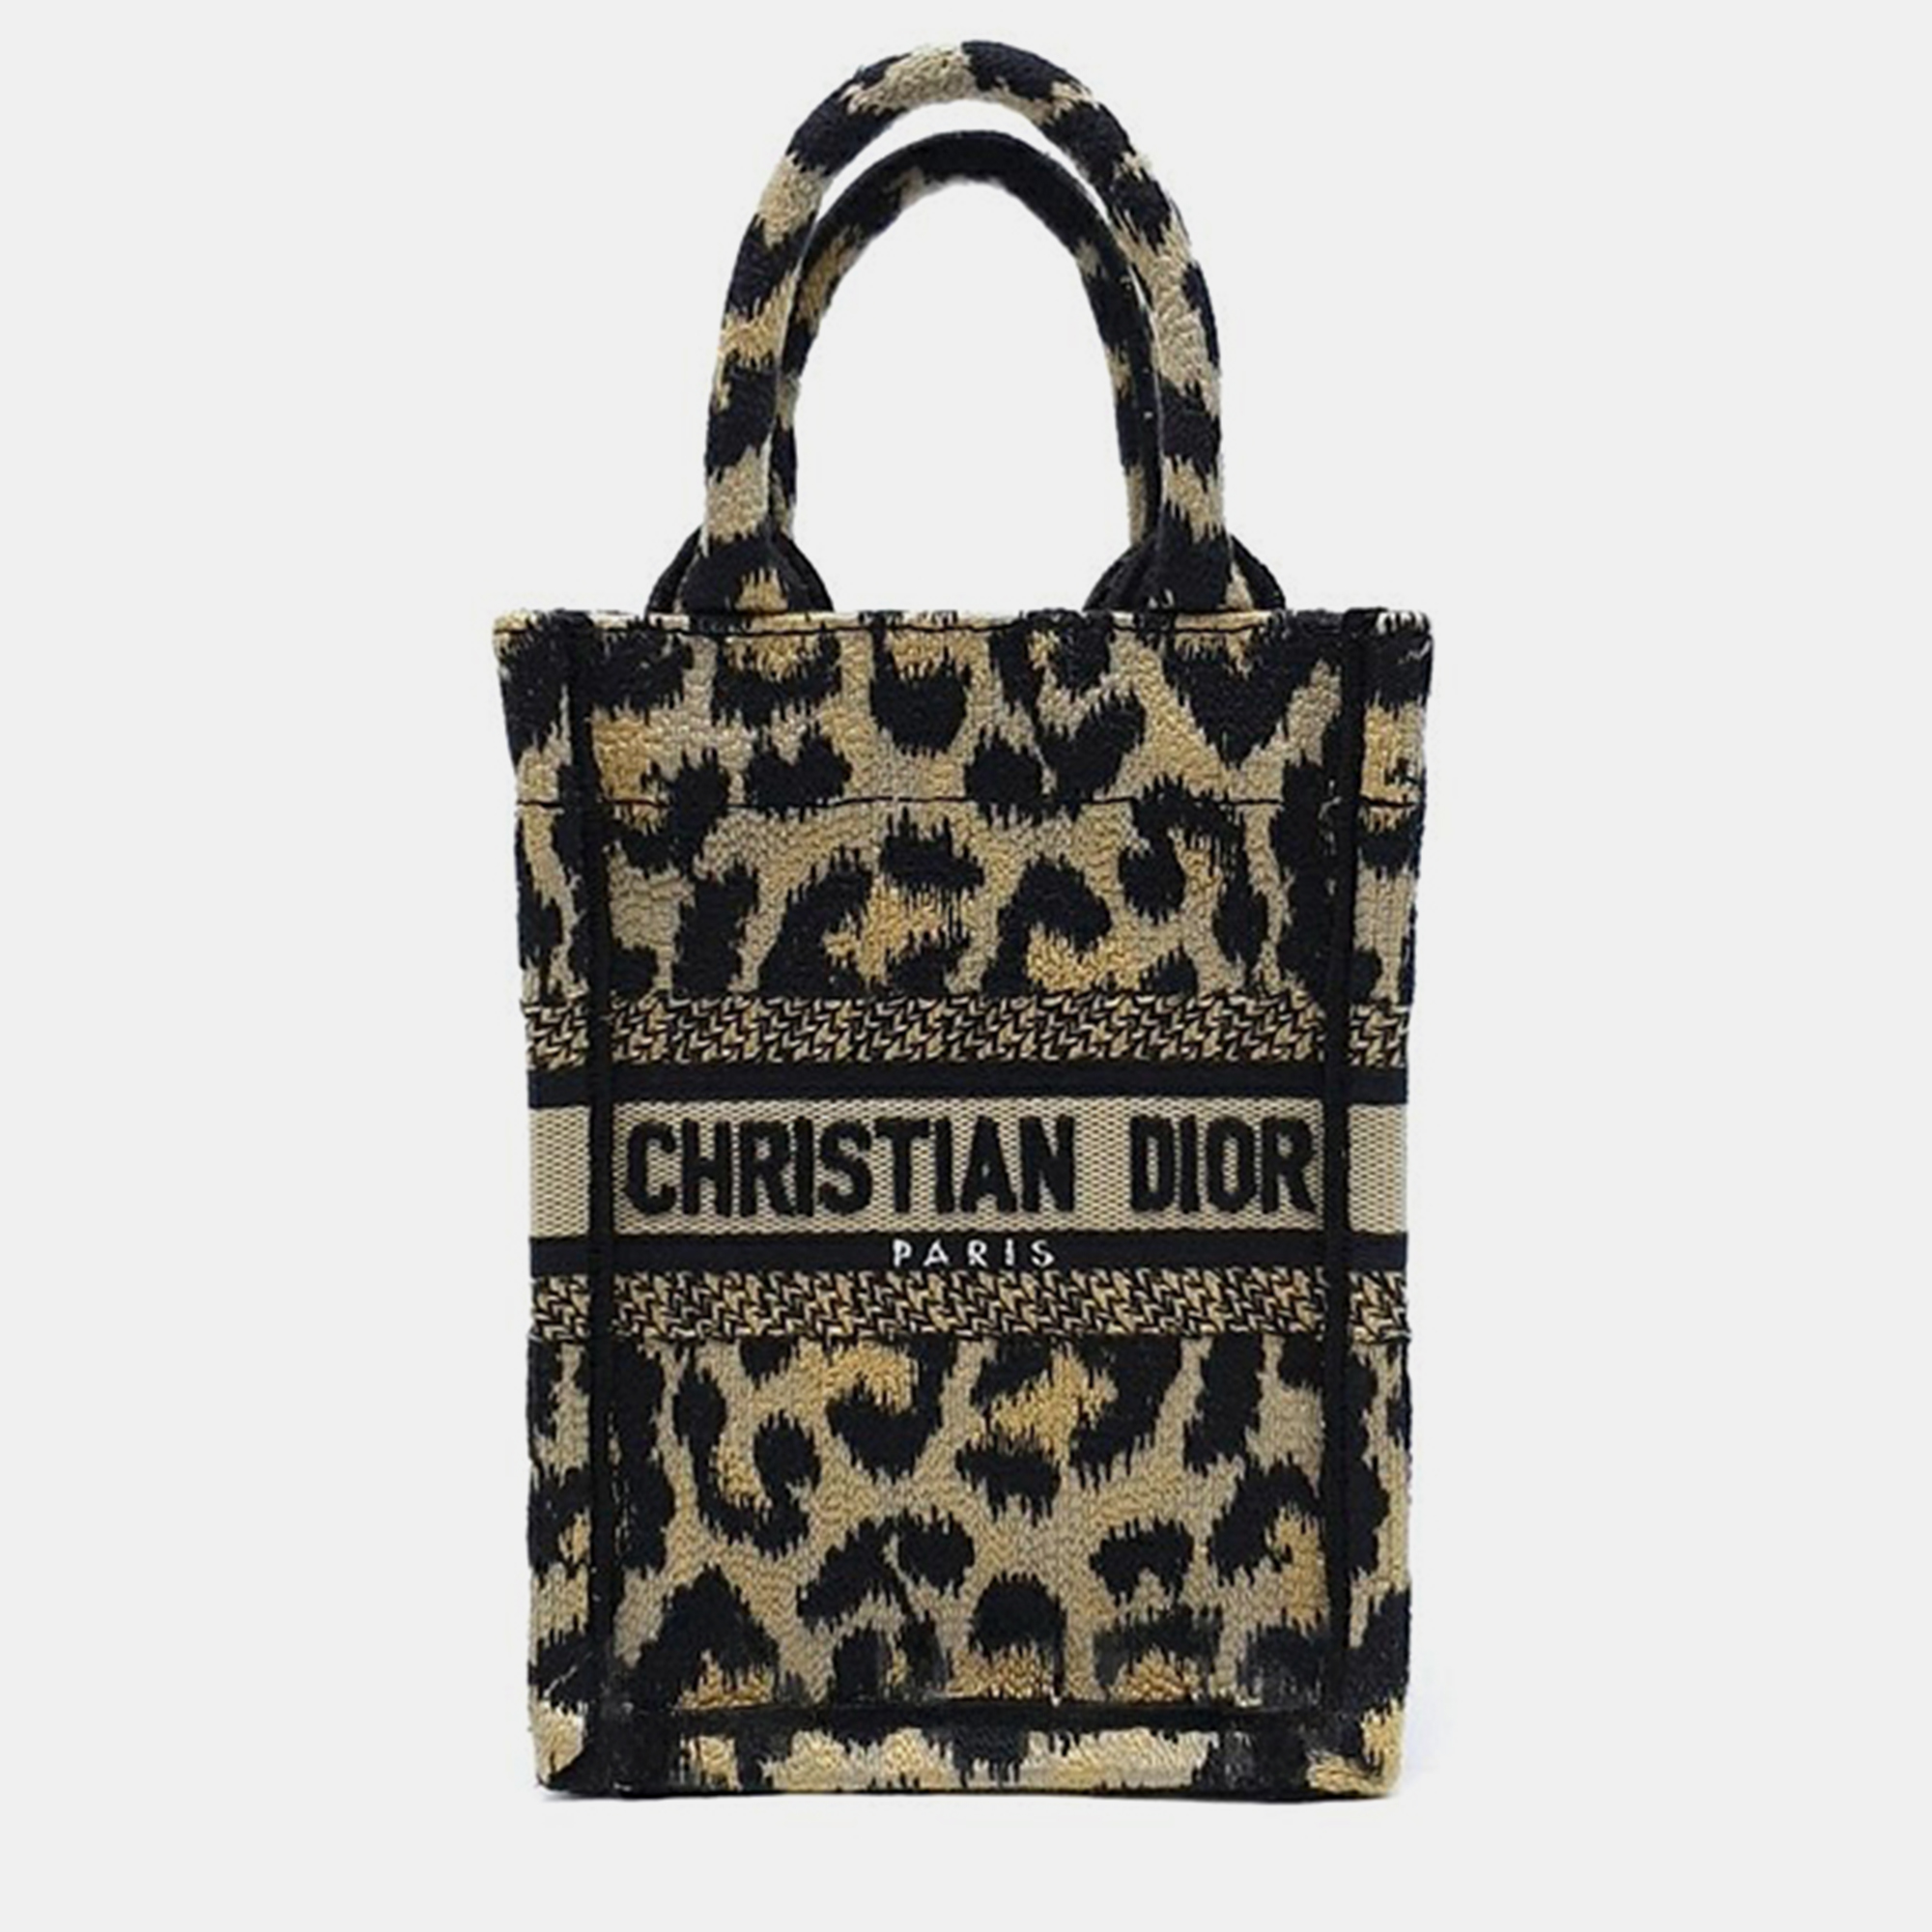 Christian dior book tote cell phone cross bag